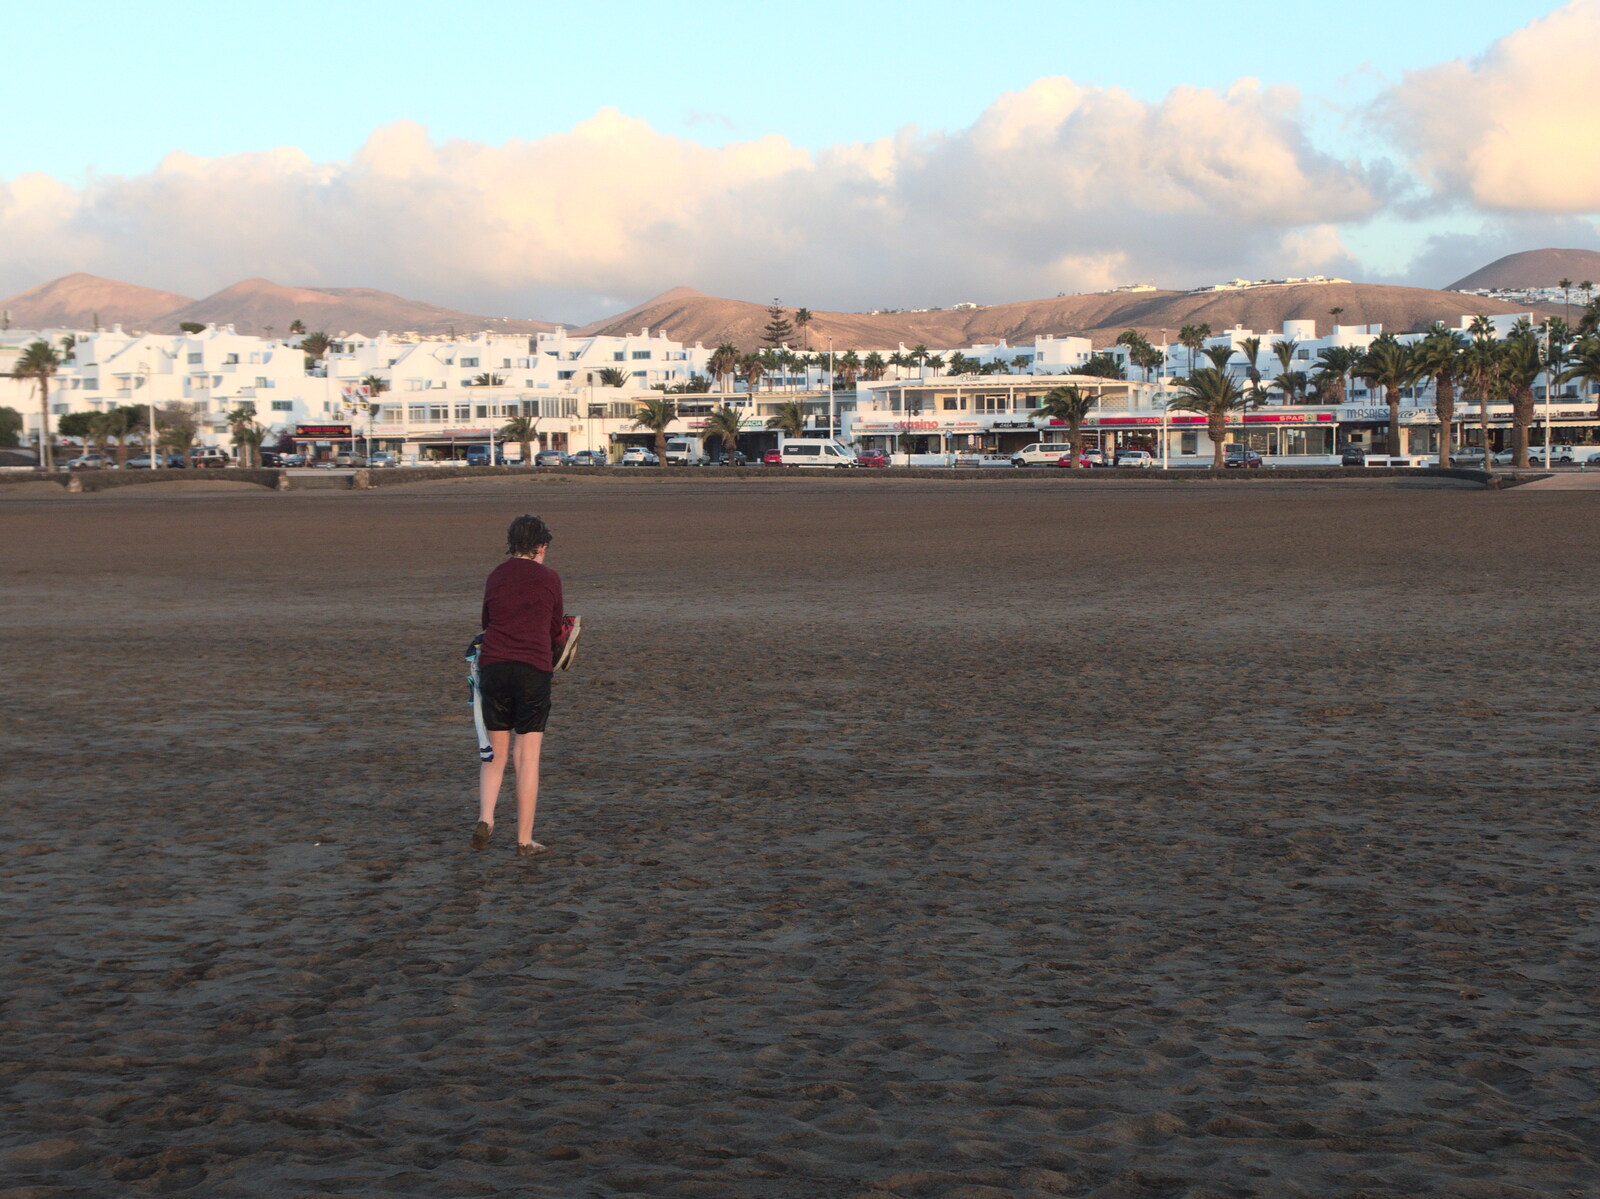 Fred heads off up the beach from The Volcanoes of Lanzarote, Canary Islands, Spain - 27th October 2021